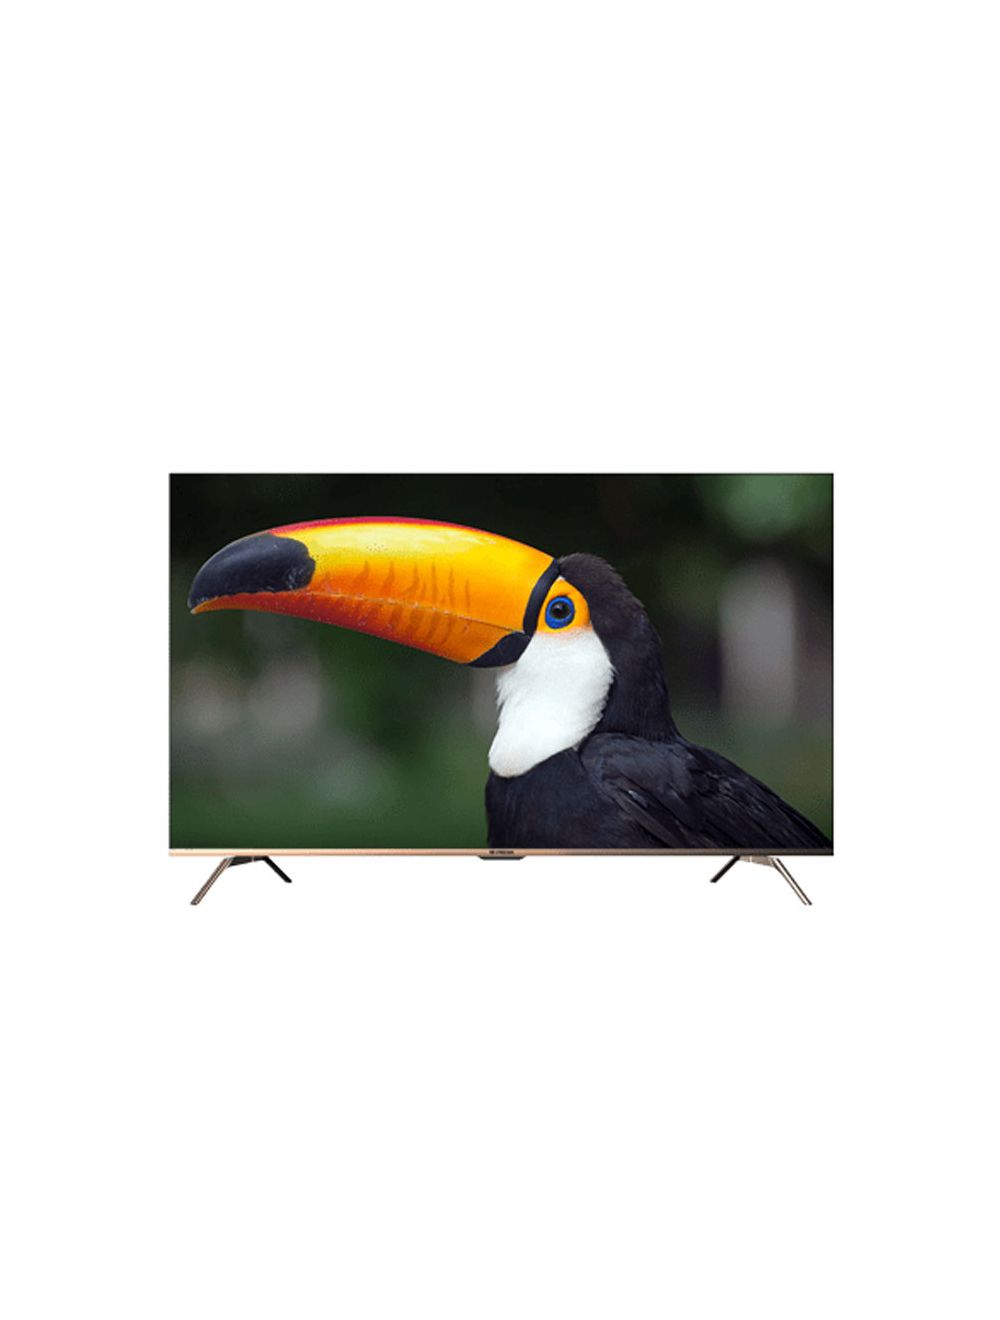 Fresh TV 32 LED HD Smart Android Built In Receiver Frameless - 32LH423RE3